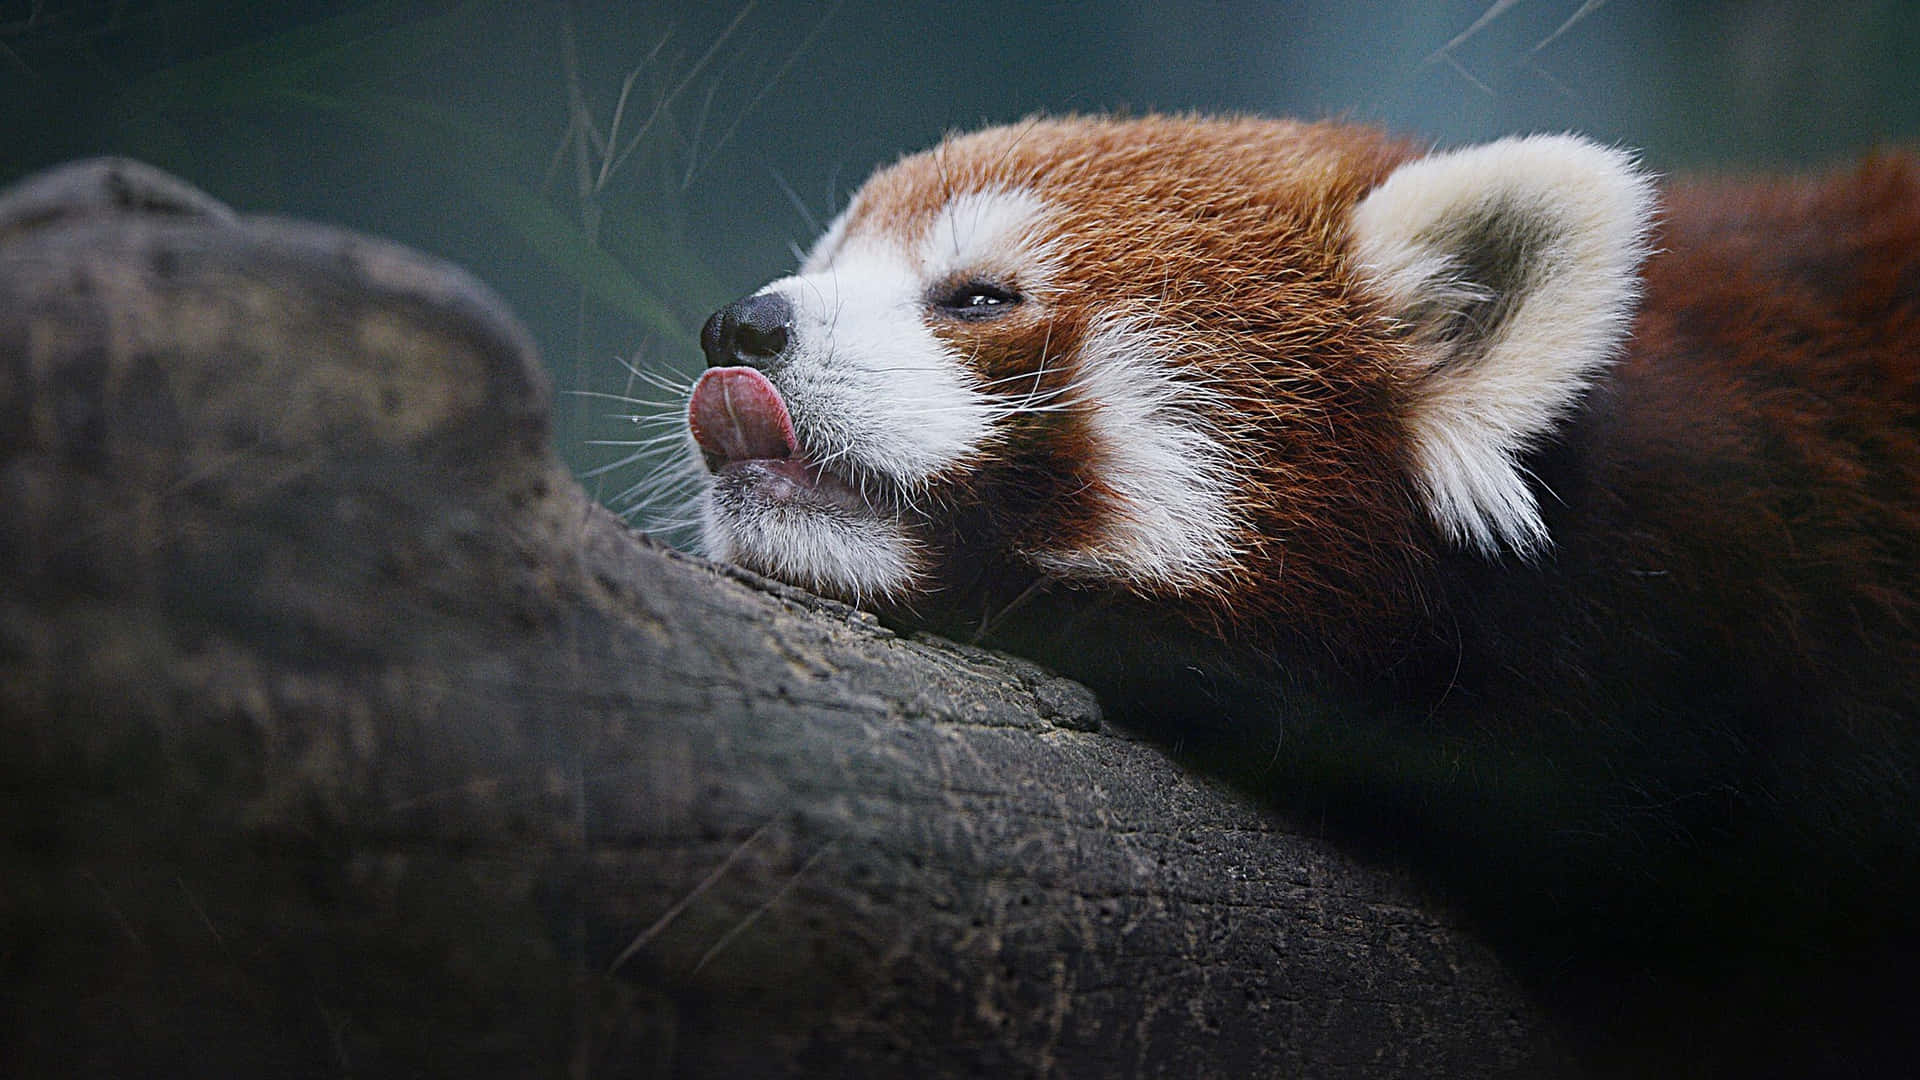 Enjoy this adorable image of a Cute Red Panda Wallpaper